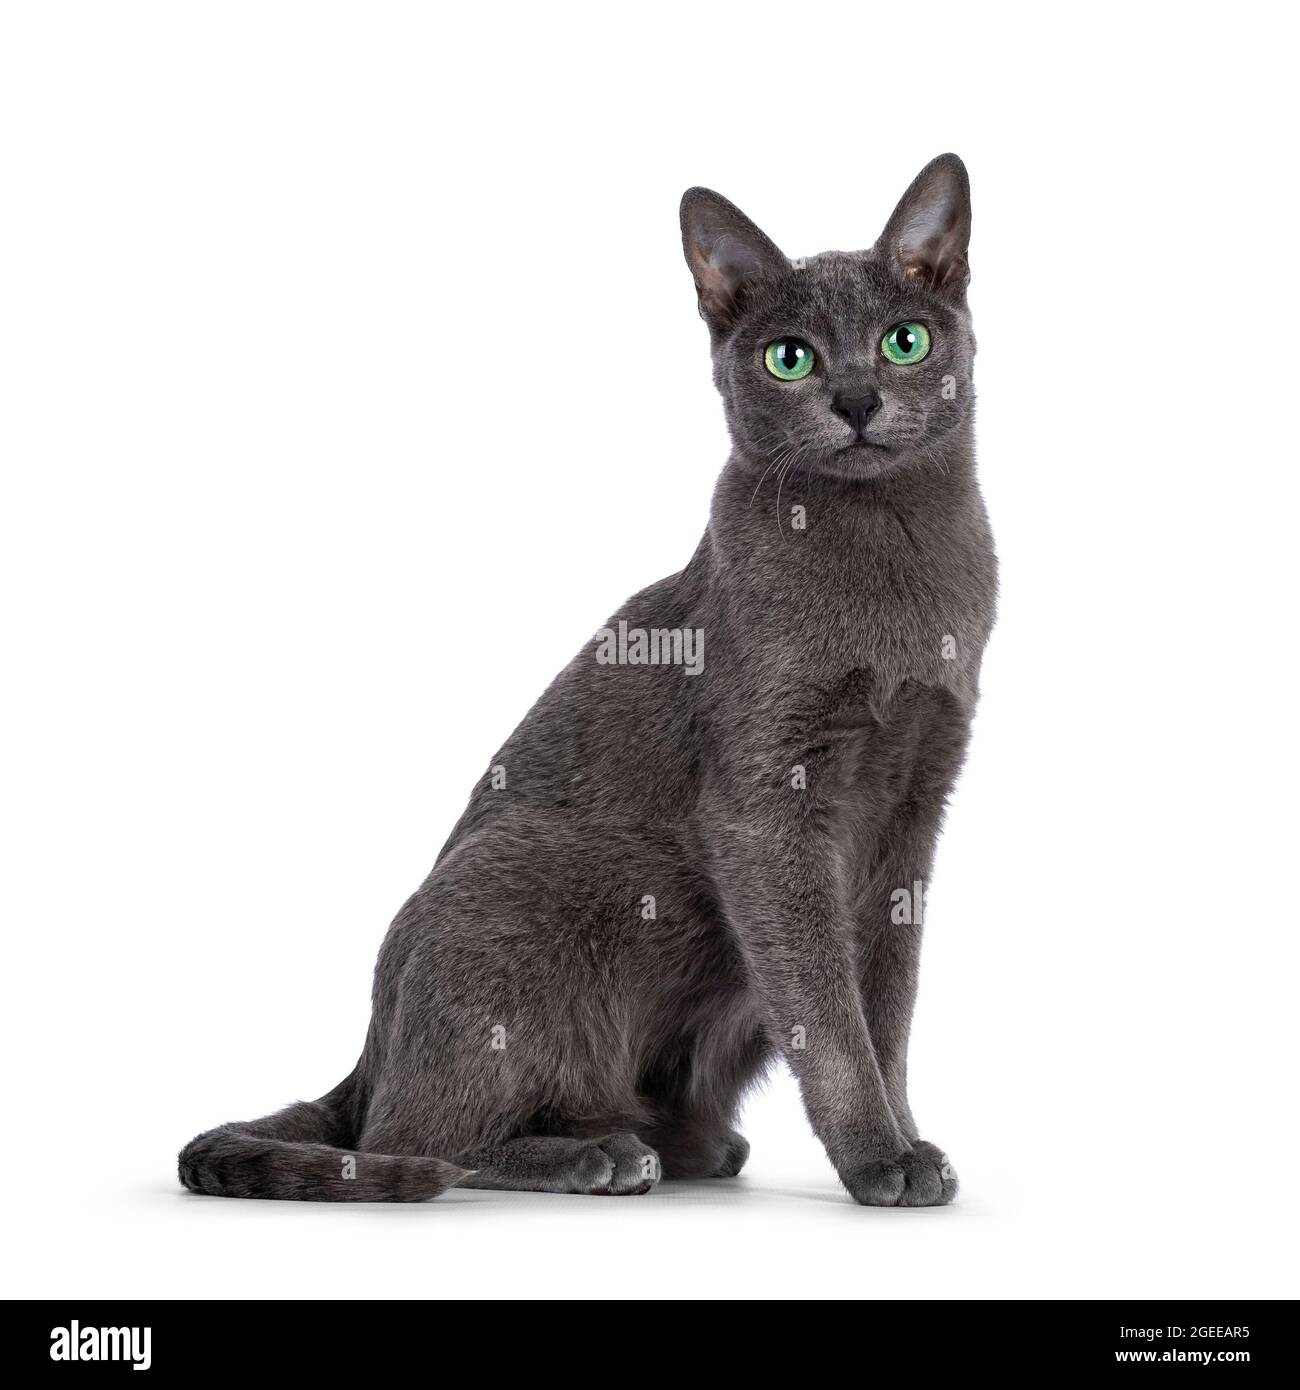 Young silver tipped Korat cat, sitting side ways. Looking towards camera with bright green eyes. Isolated on a white background. Stock Photo